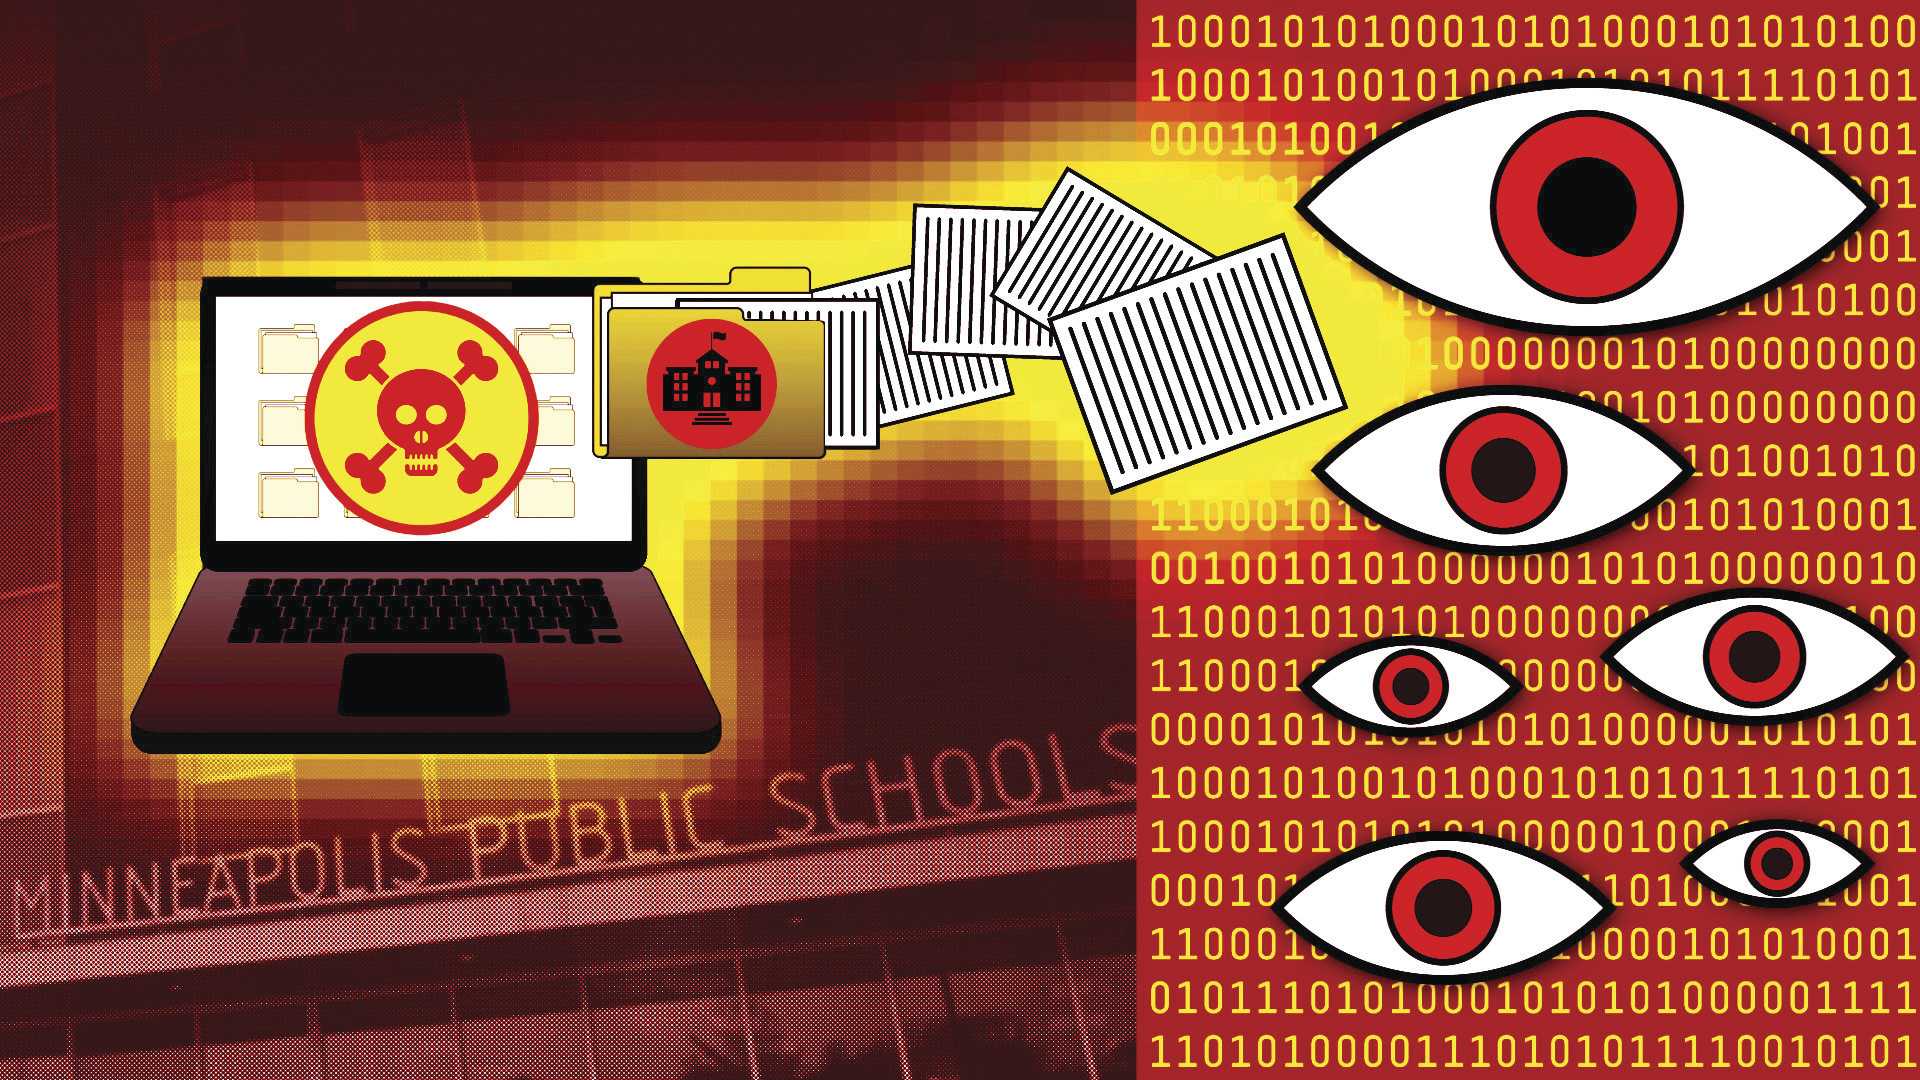 Ransomware criminals are dumping kids’ private files online after school hacks